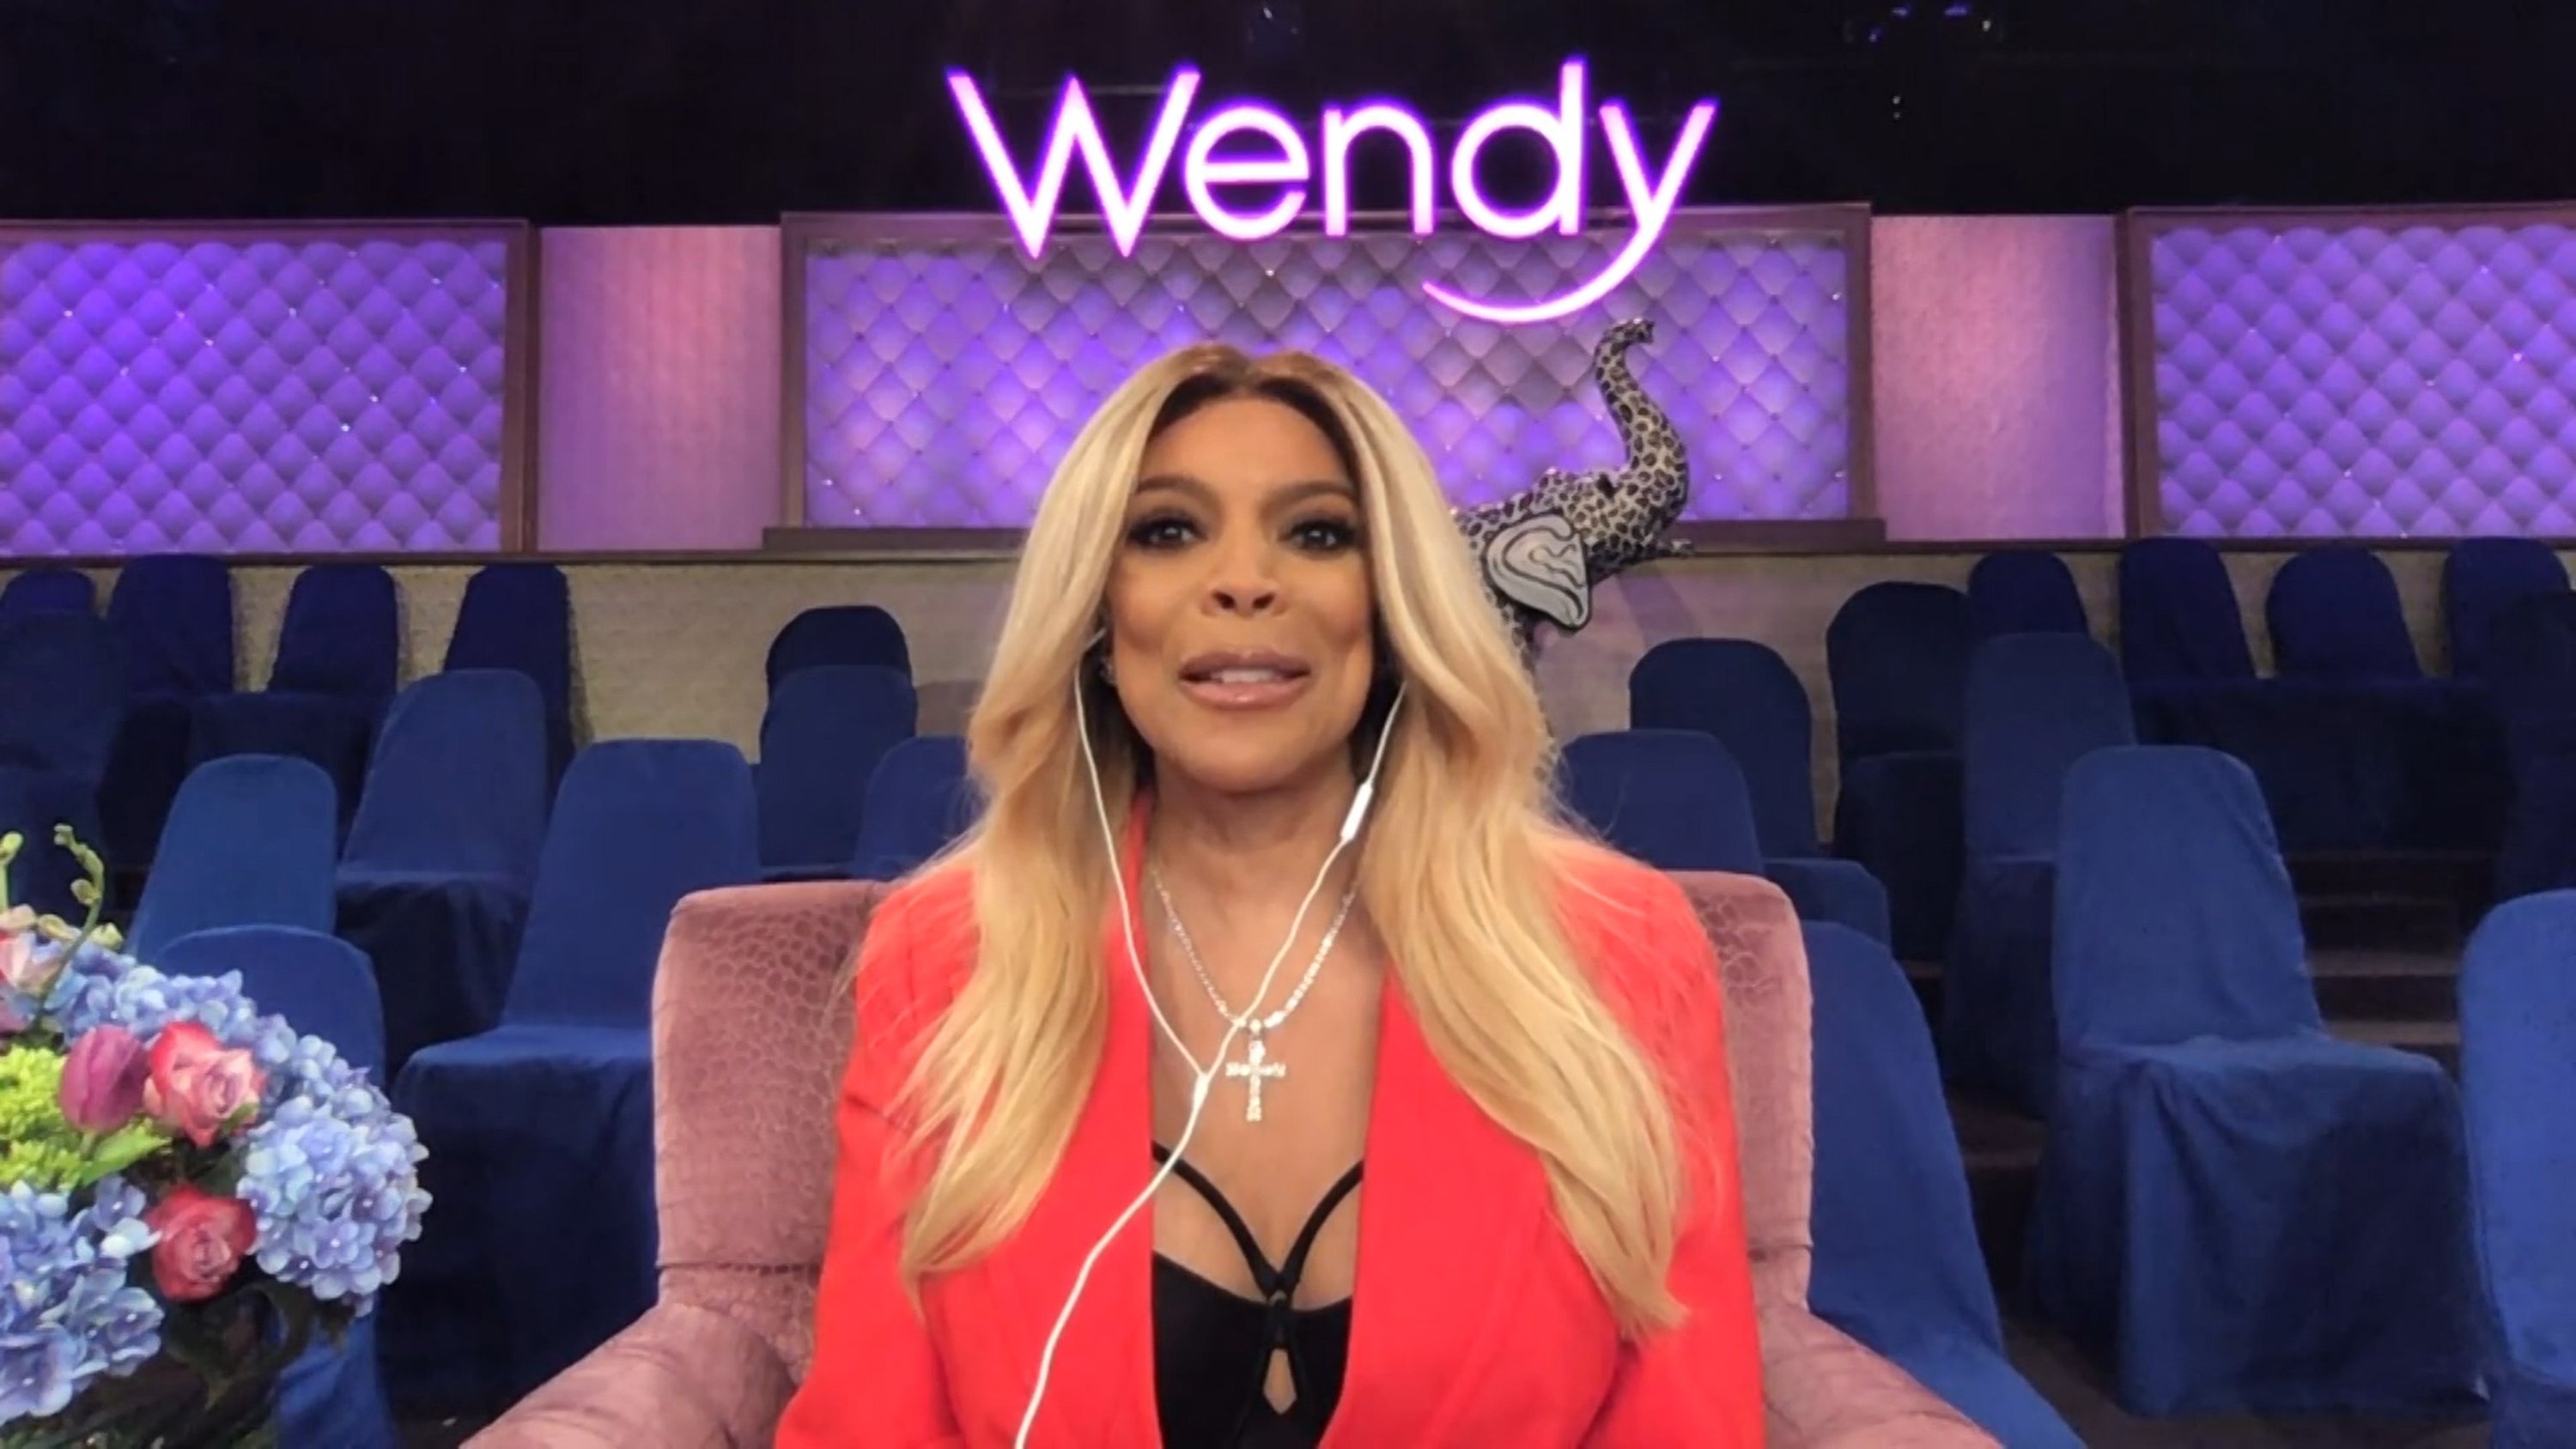 Wendy Williams sitting in her purple chair on the set of her show, wearing an orange blazer and black top